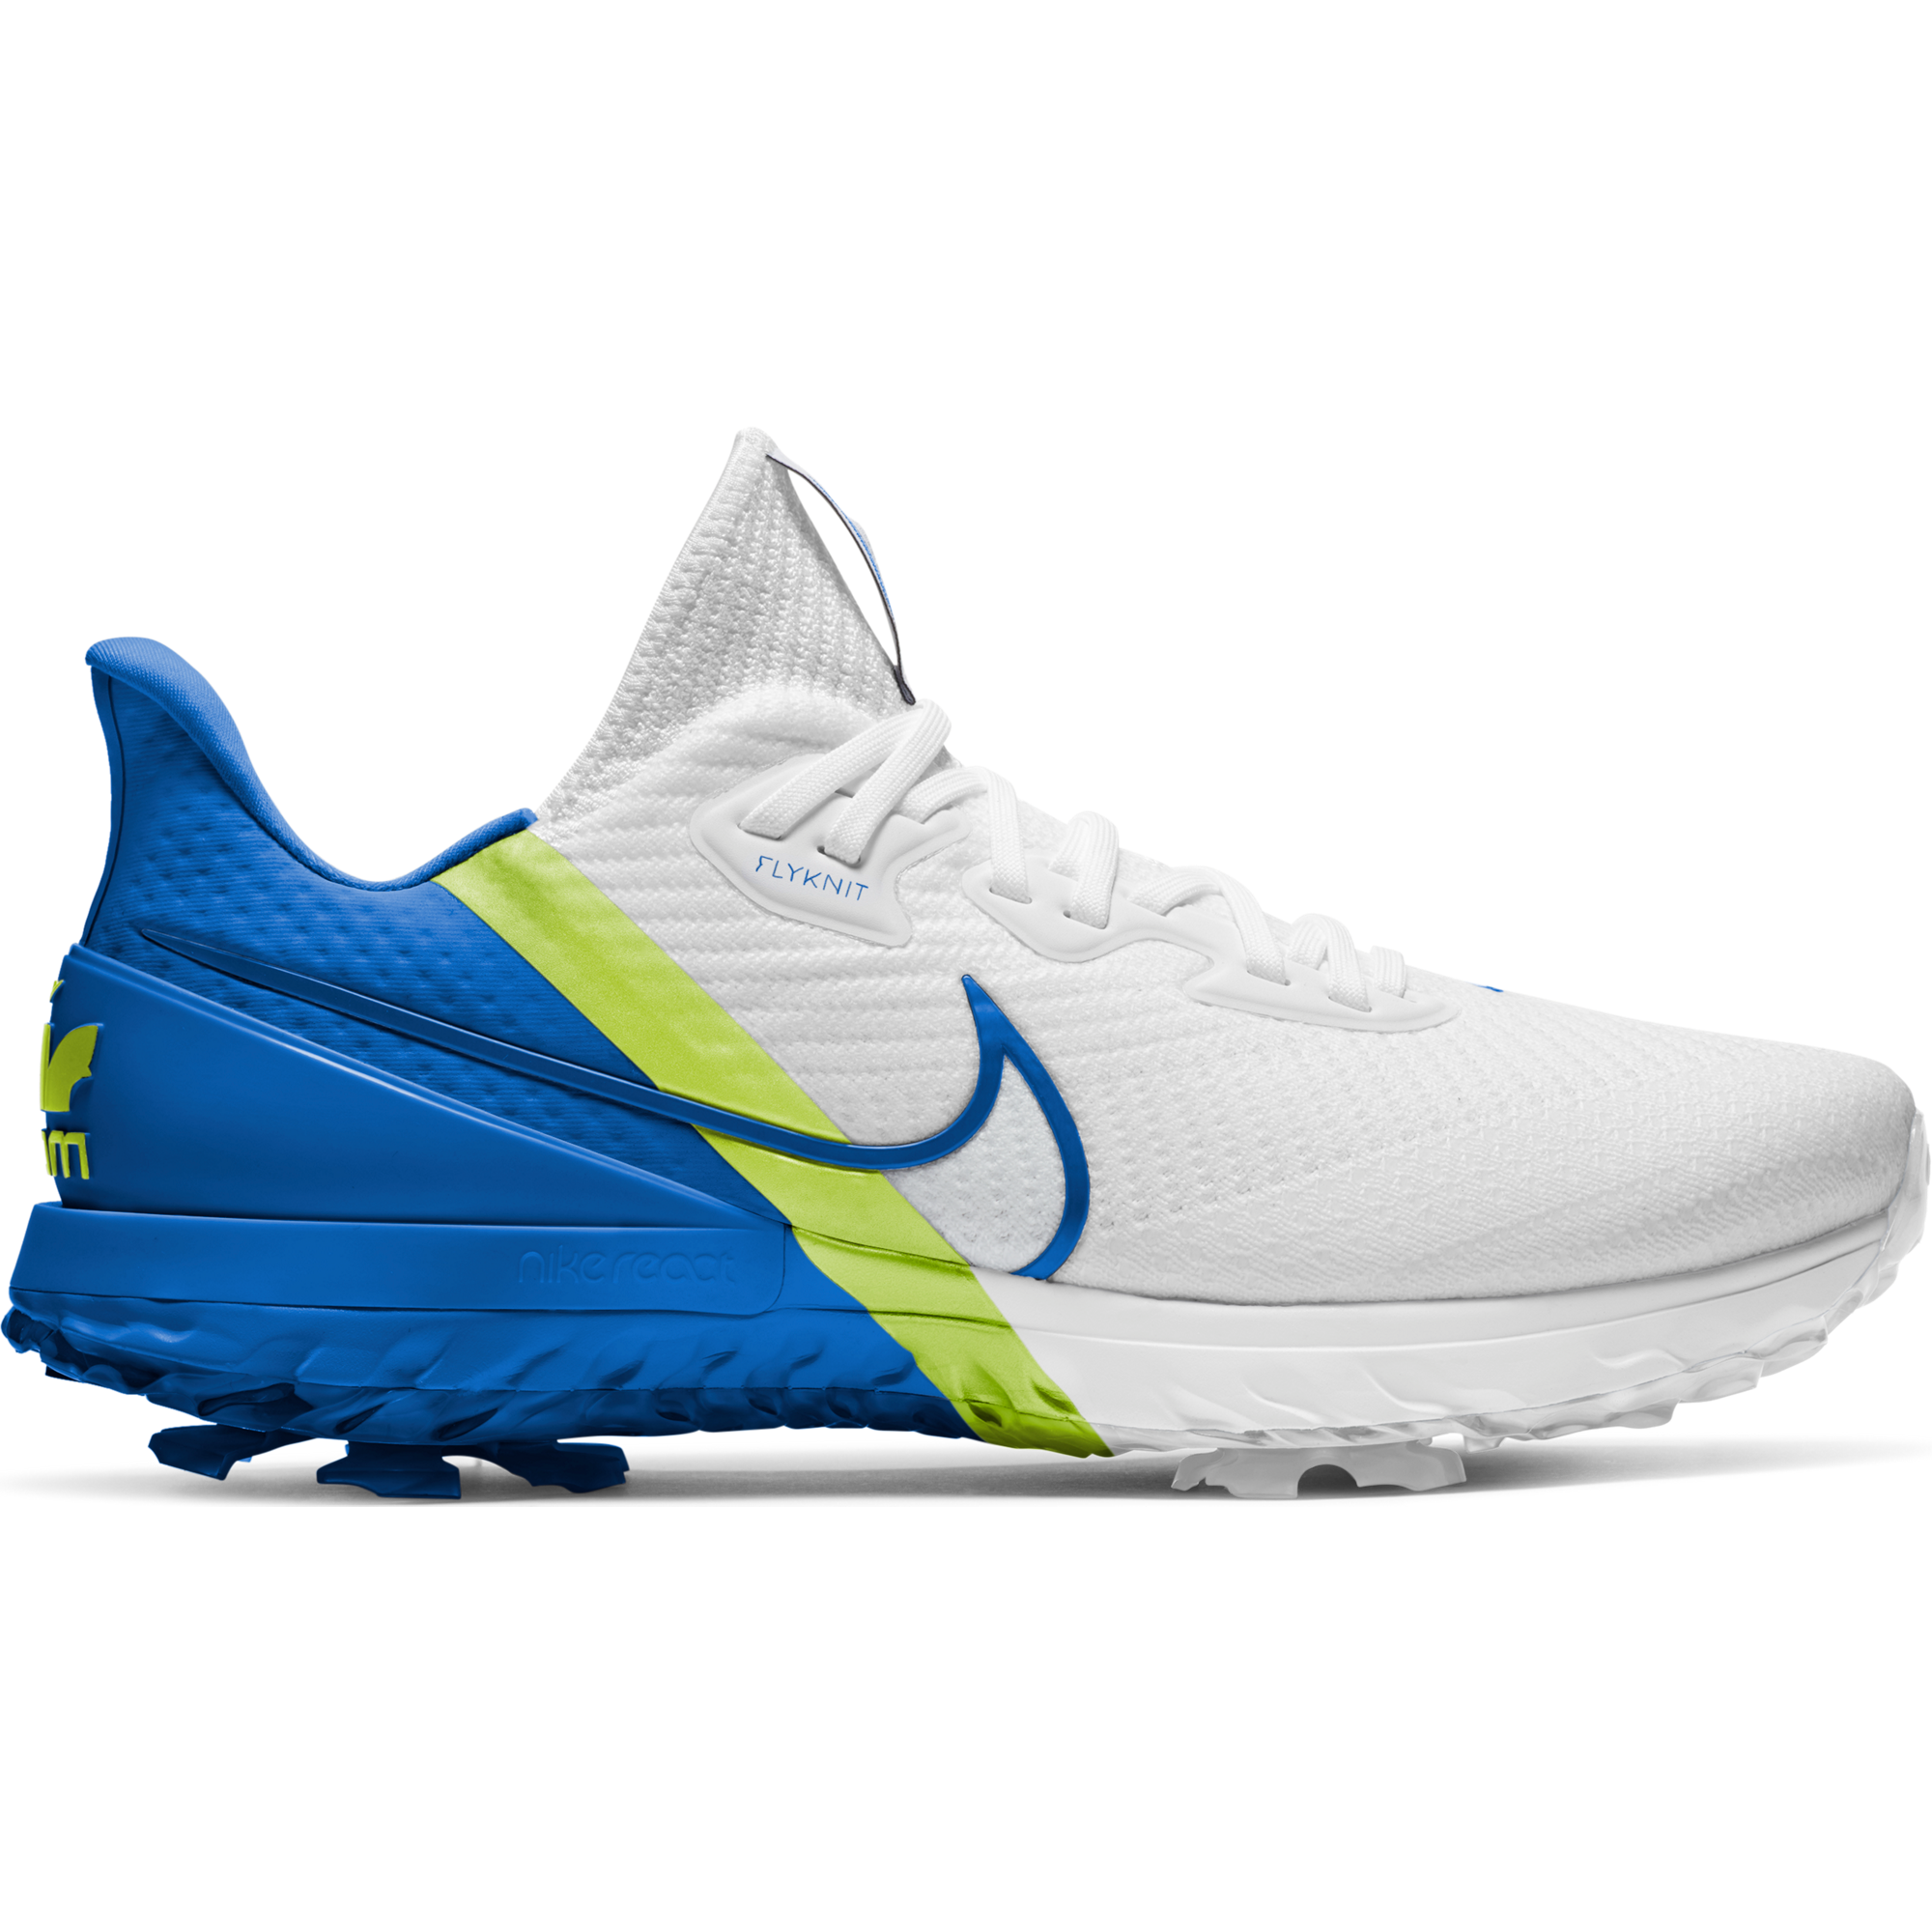 Men's Air Zoom Infinity Tour Spiked Golf Shoe - White/Blue/Green 